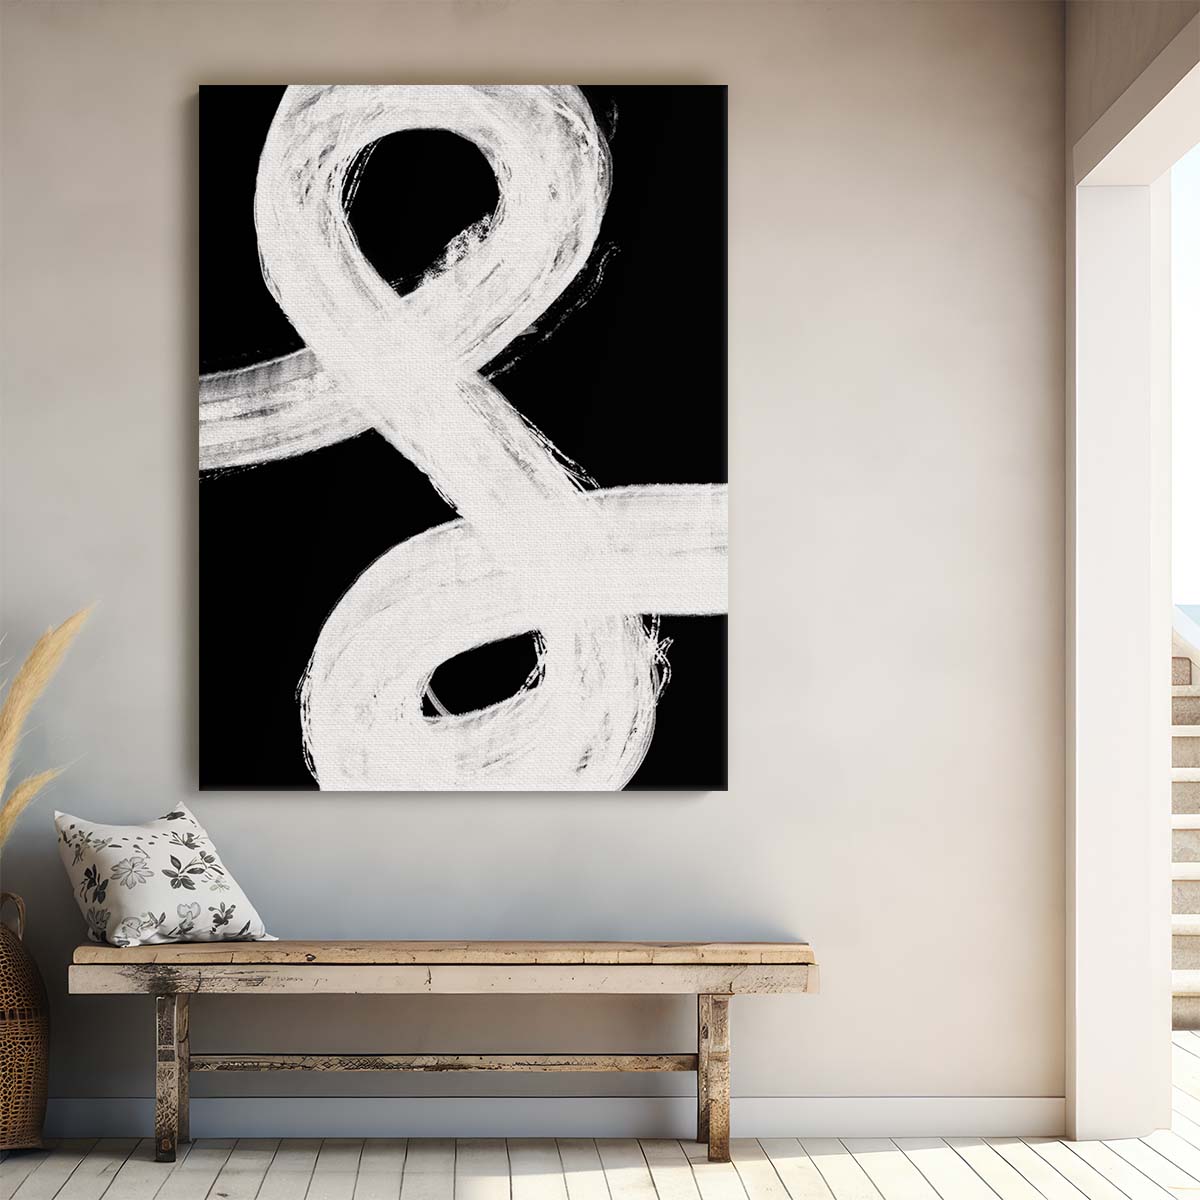 Monochrome Abstract Geometric Illustration Painting with Texture by Luxuriance Designs, made in USA